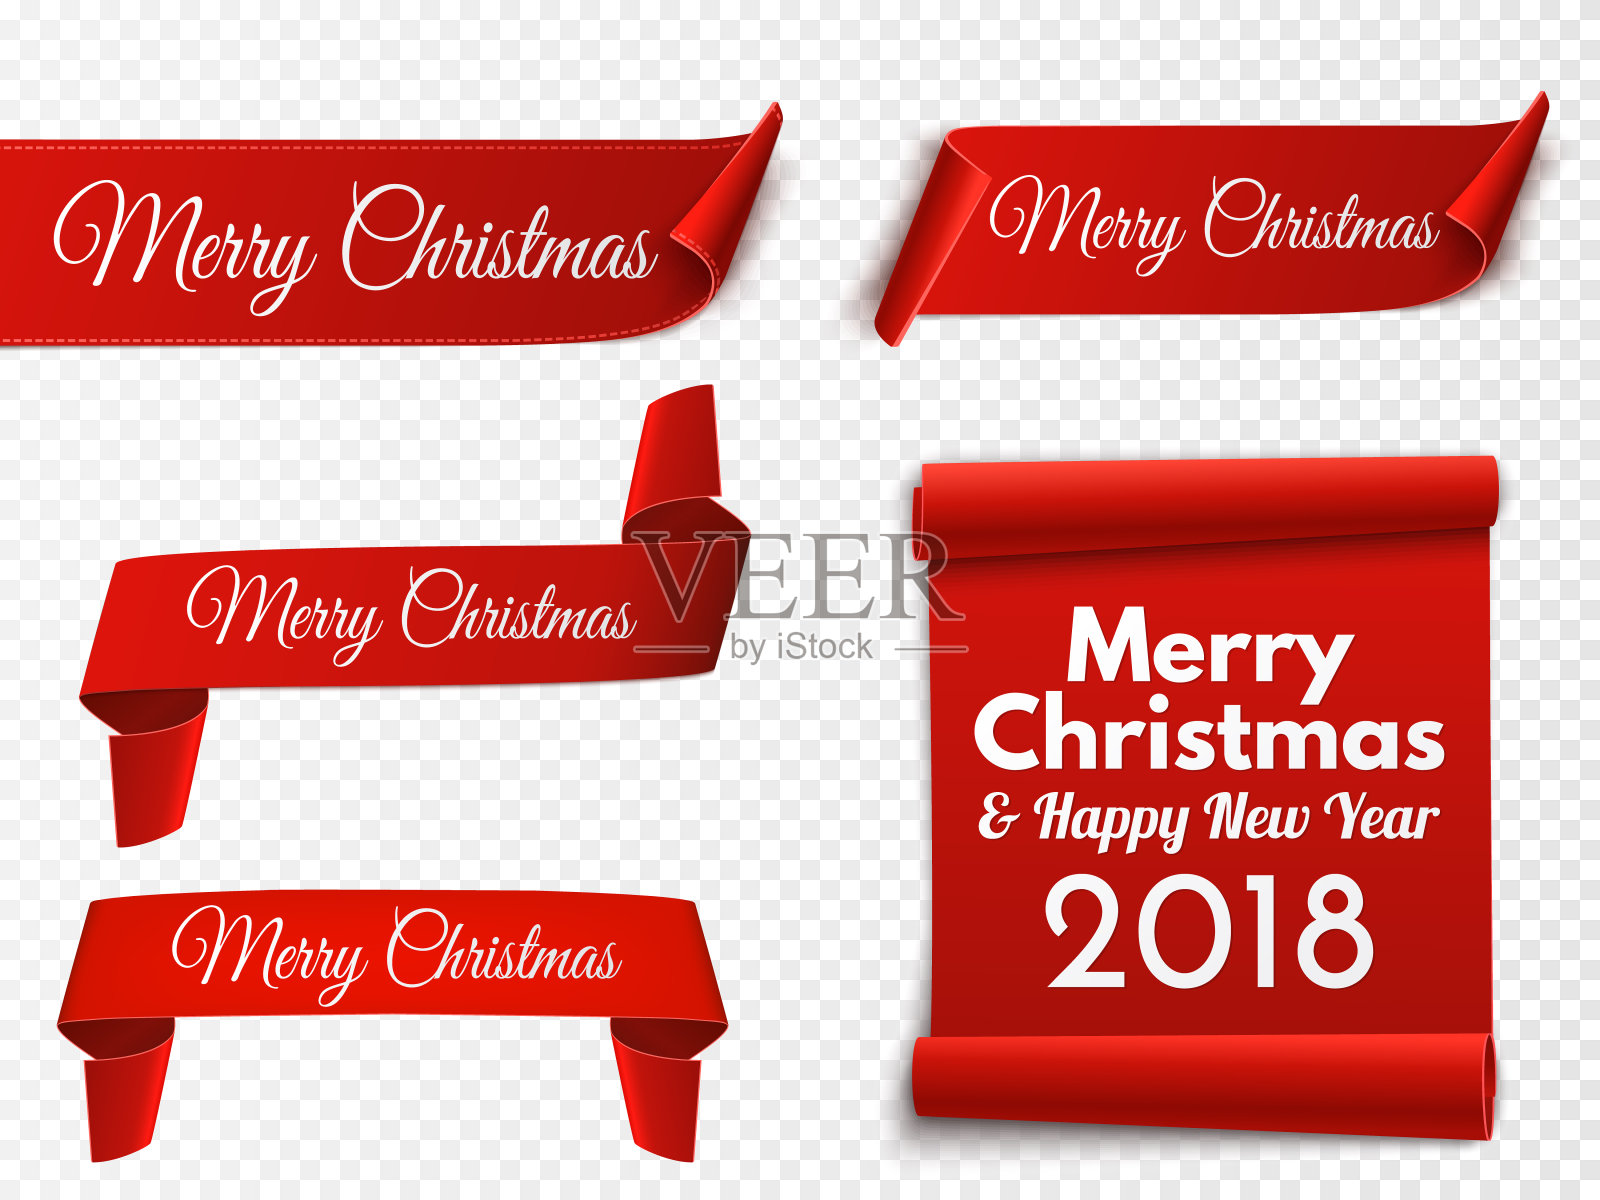 Set of red Christmas banners. Paper scrolls. Vector插画图片素材